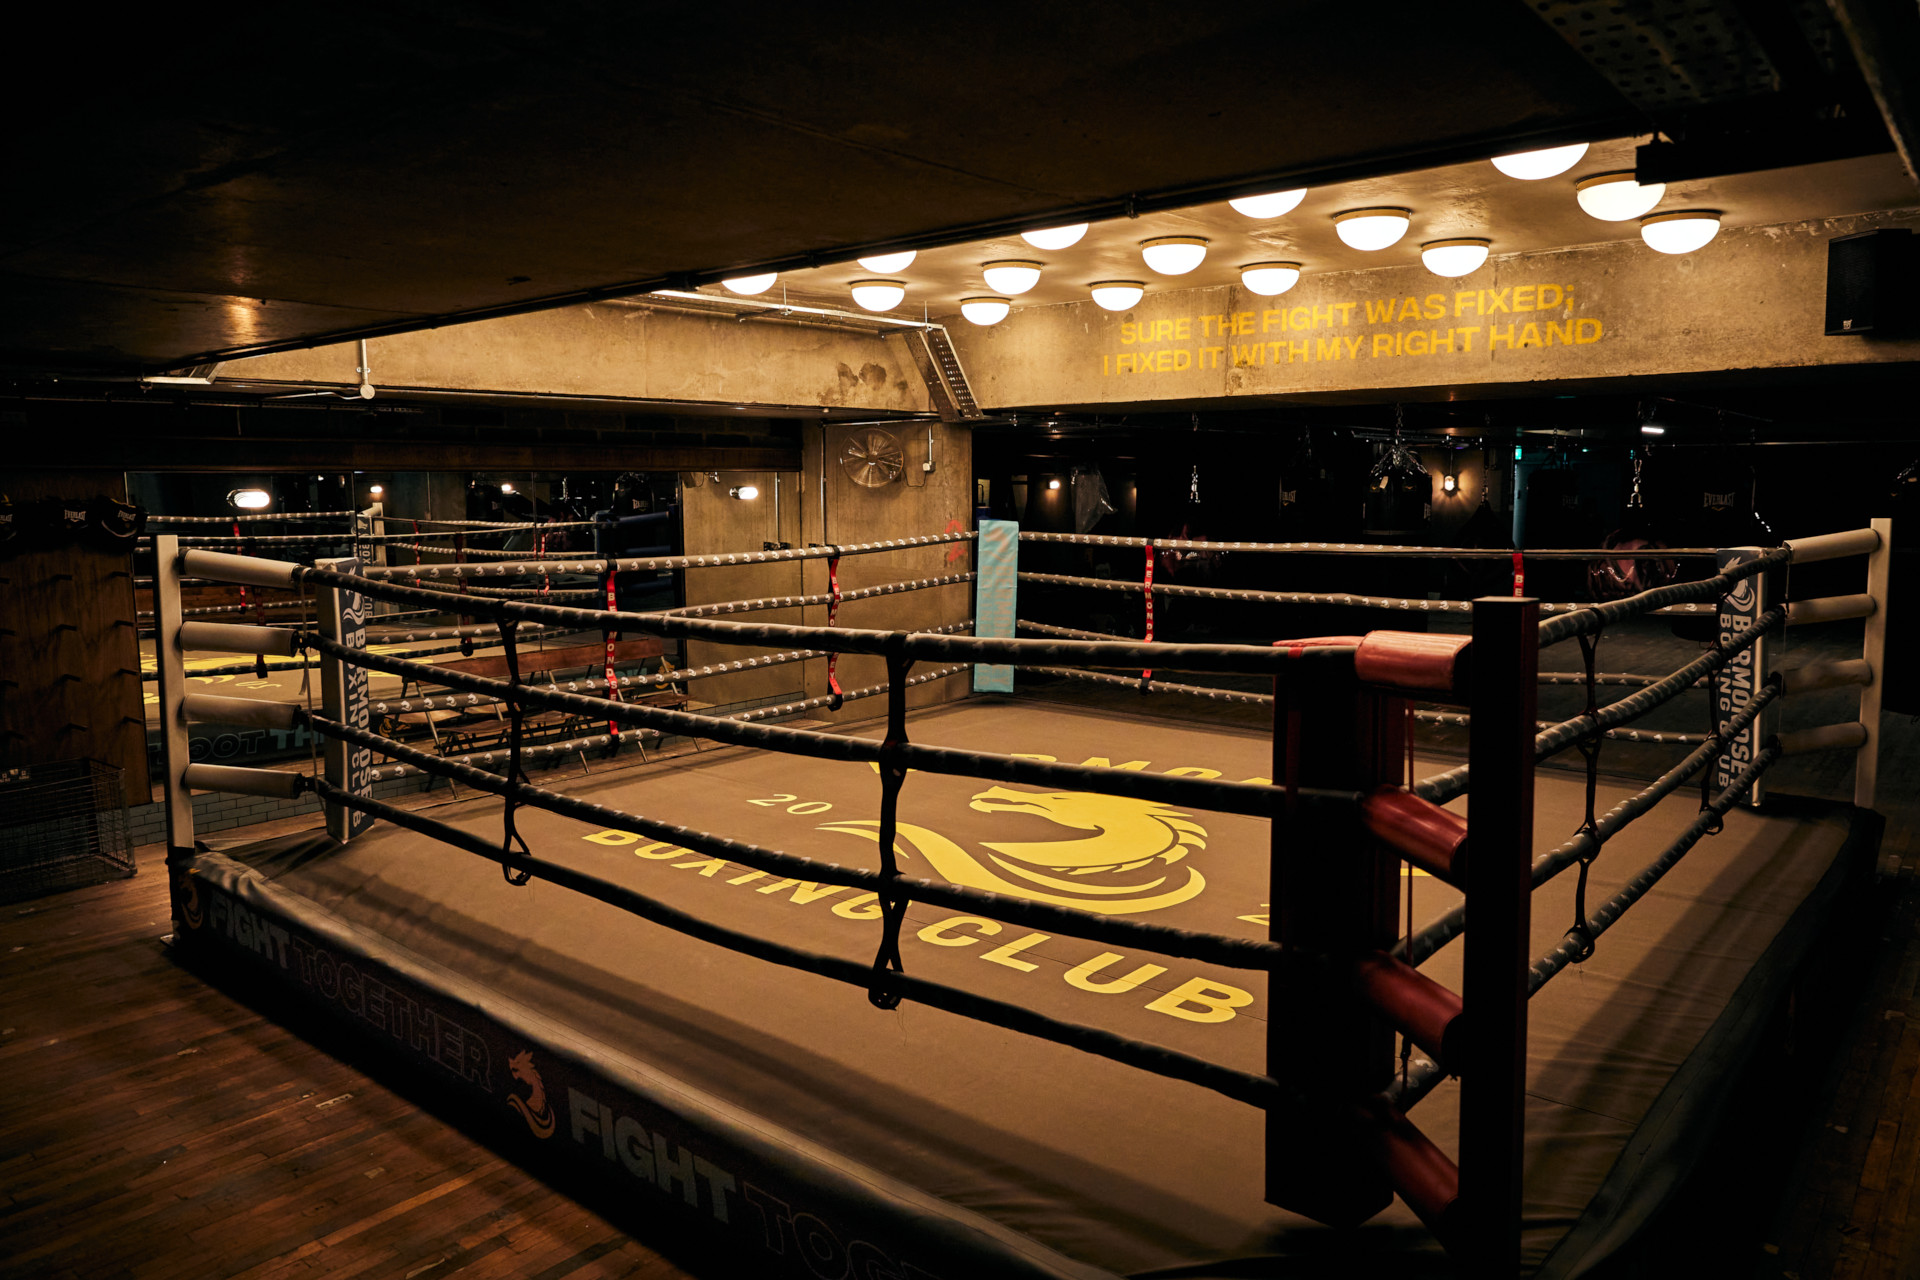 Boxing ring under low lights